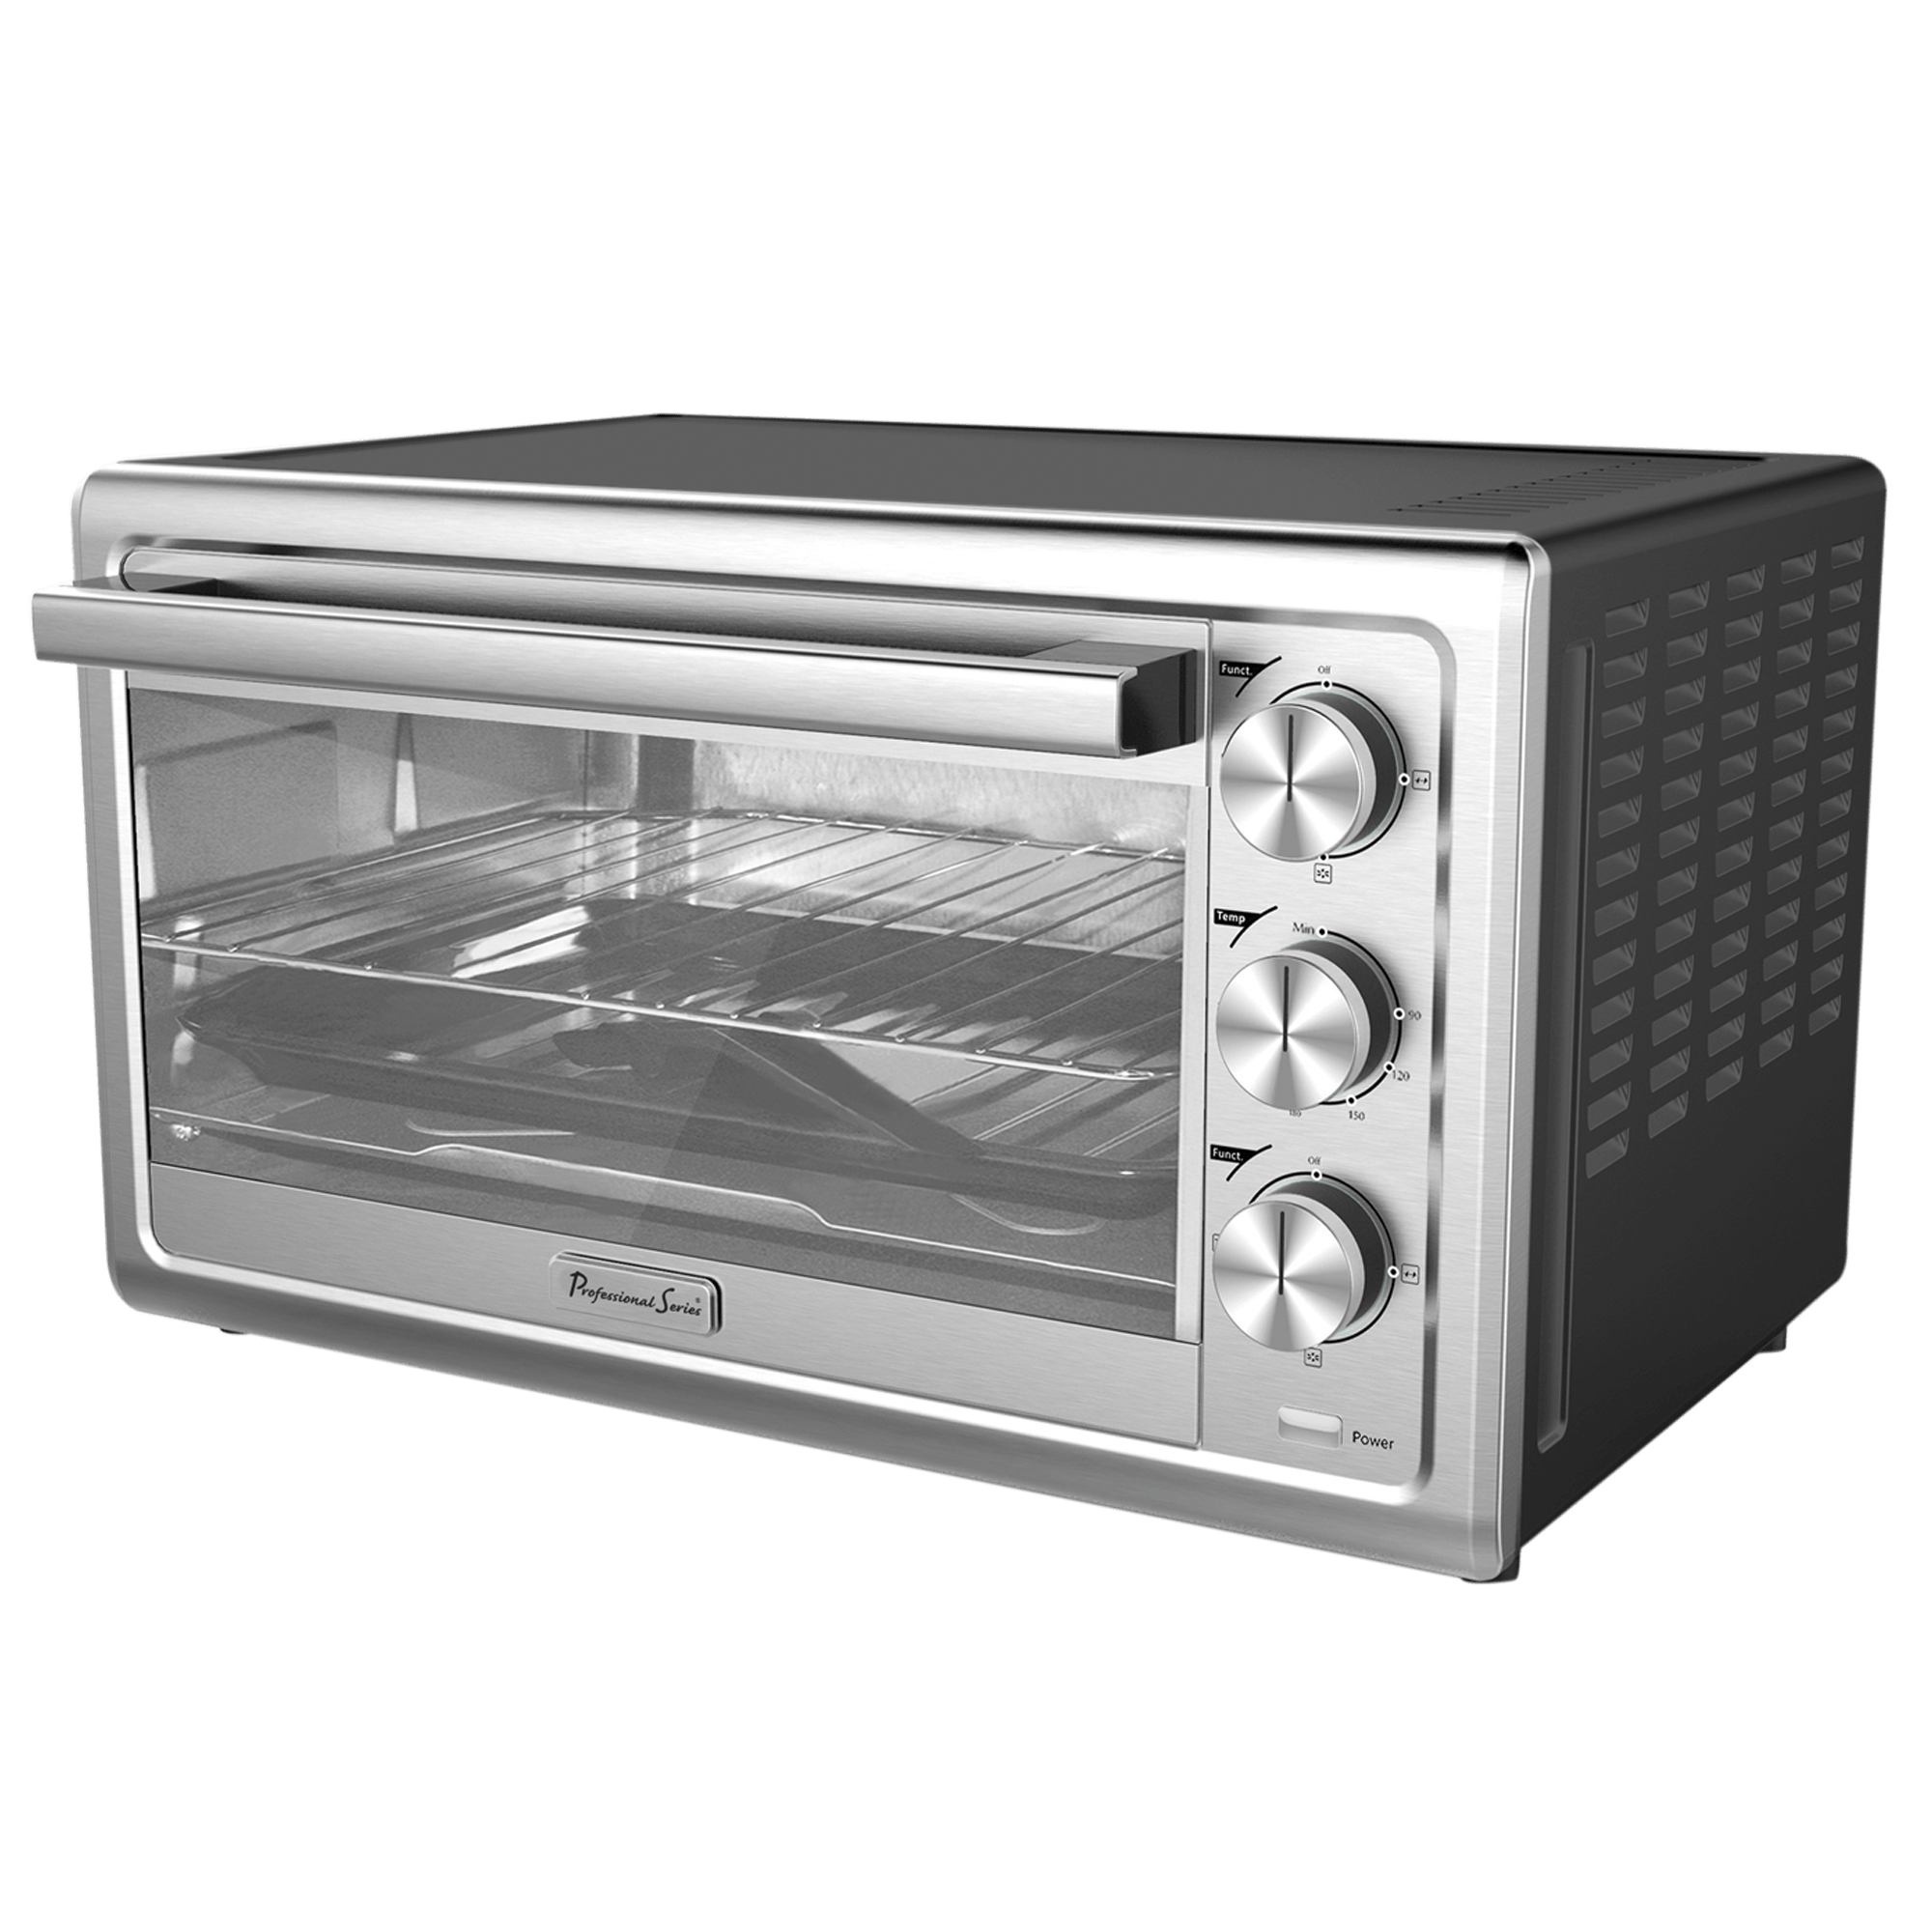 Toaster Oven & Air Fryer, 23L, Stainless Steel